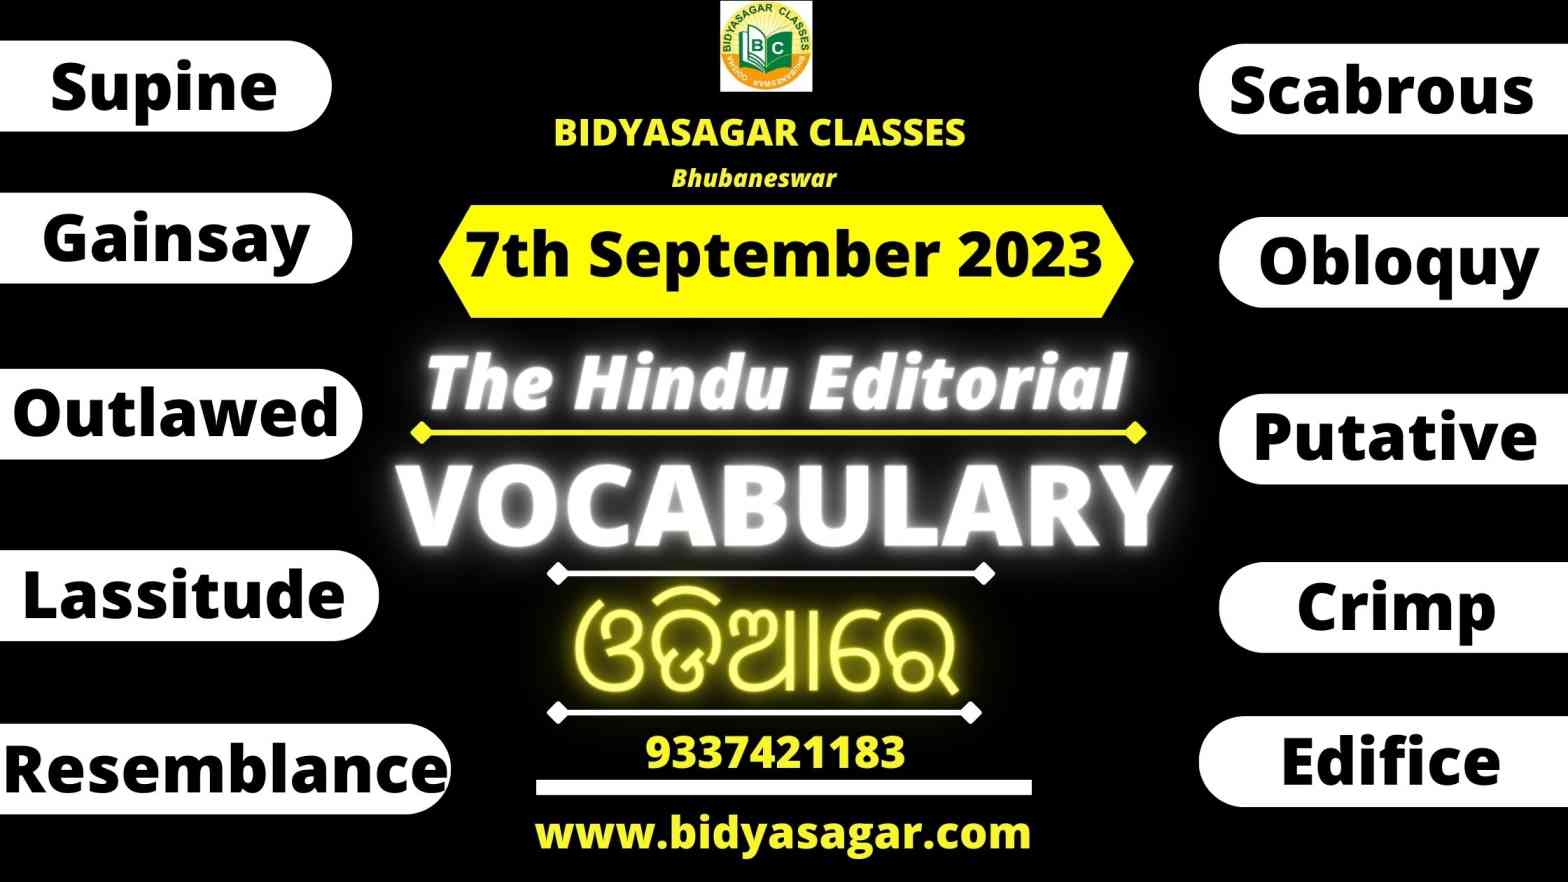 The Hindu Editorial Vocabulary of 7th September 2023